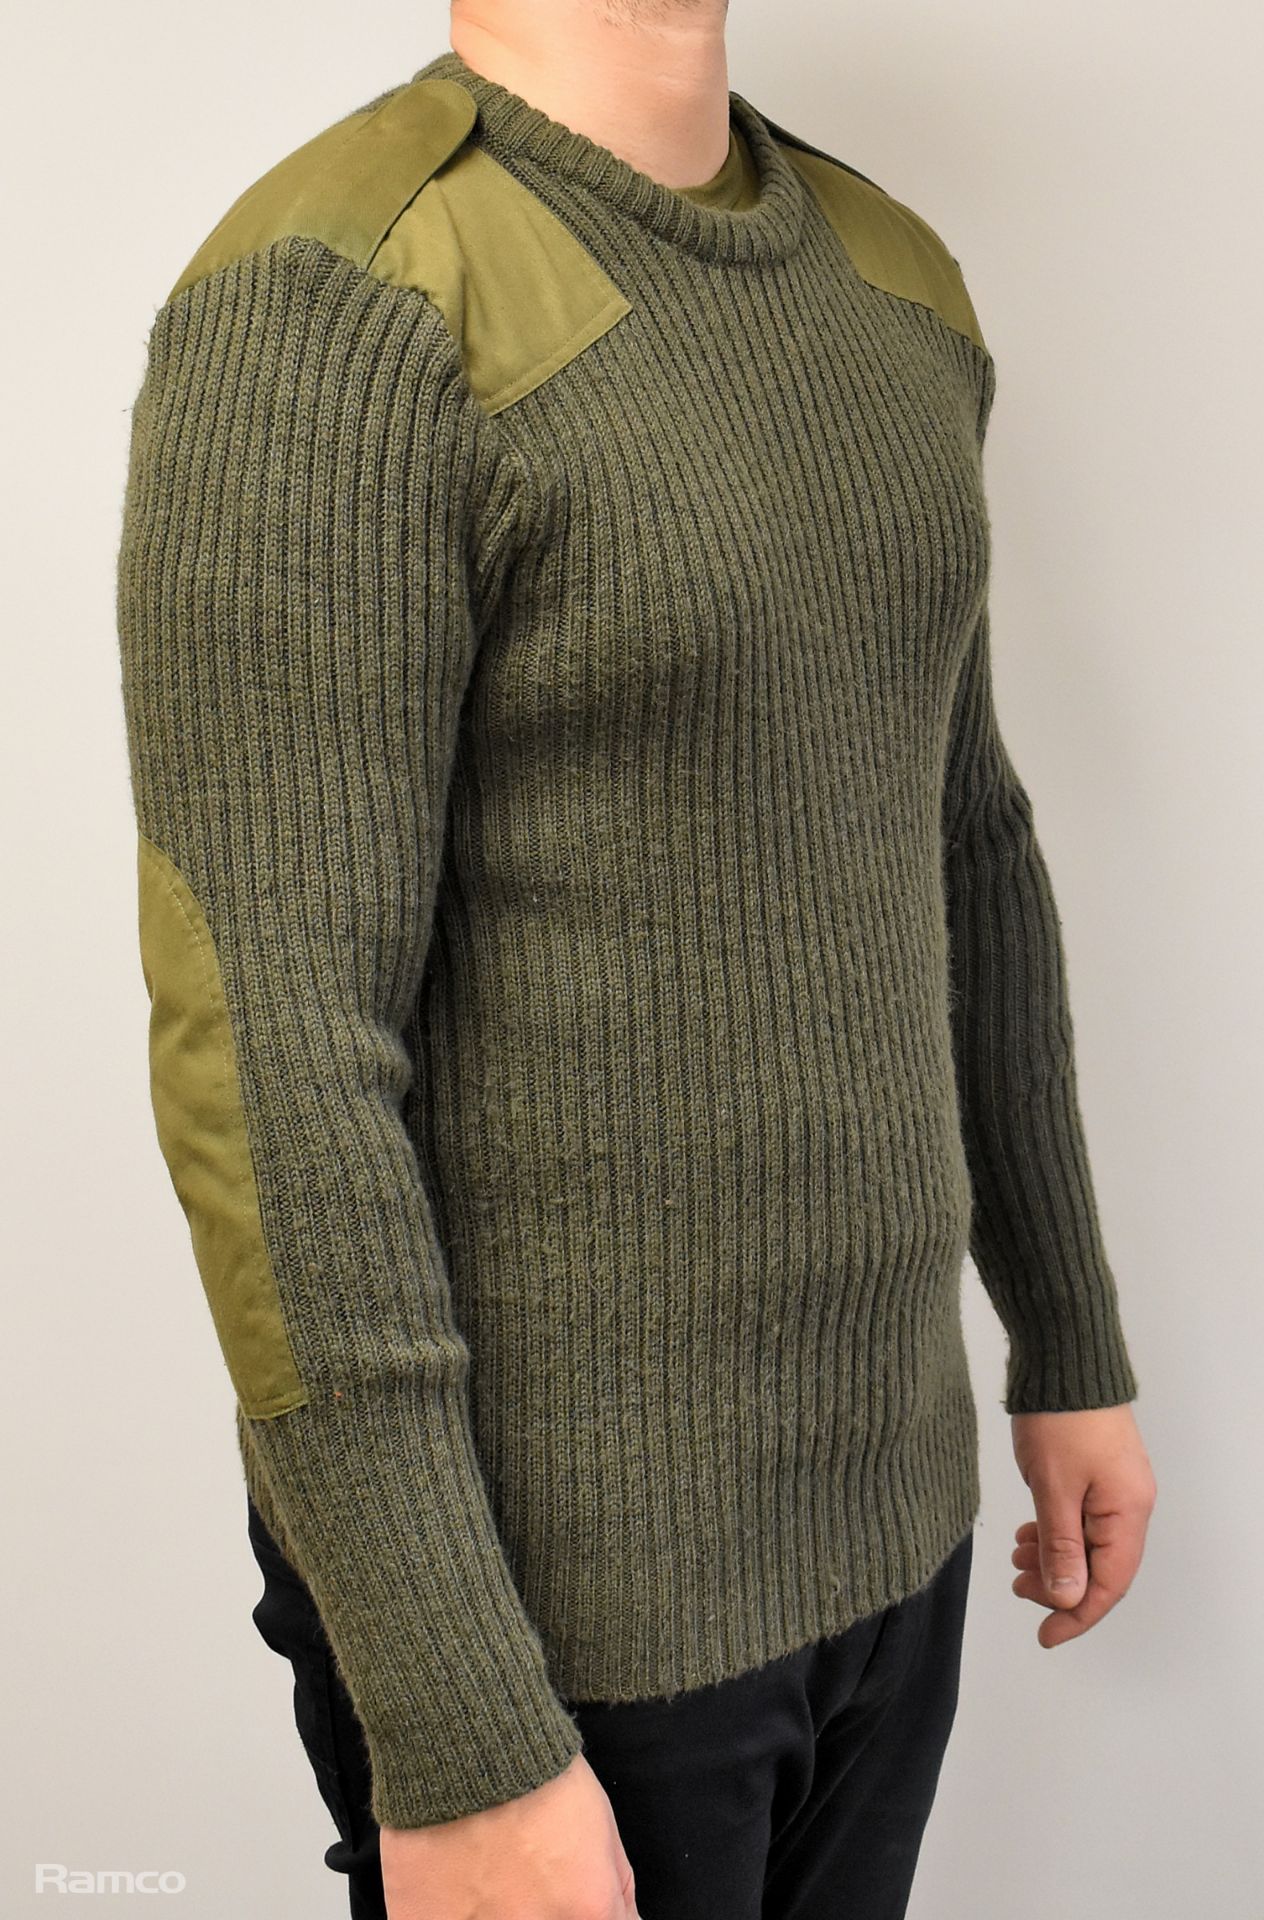 100x British Army wool jerseys - Olive - mixed grades and sizes - Image 4 of 9